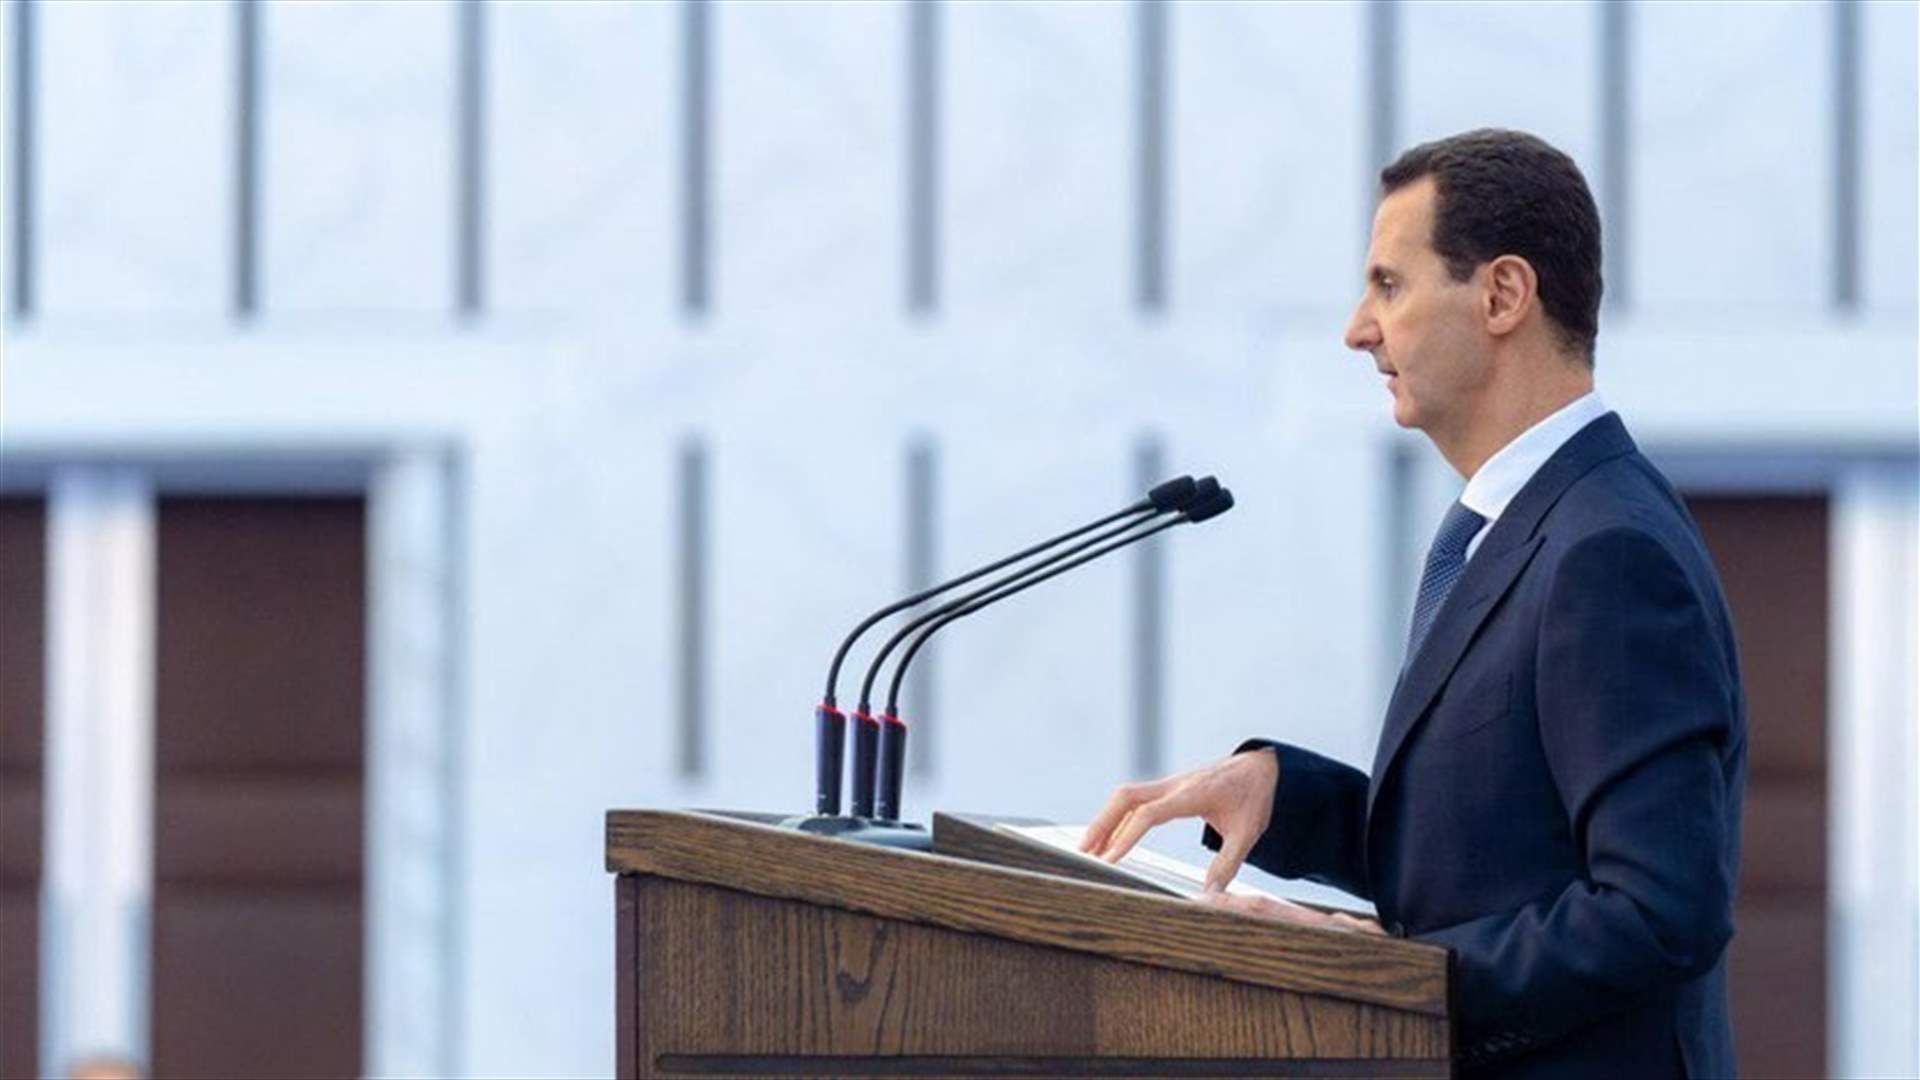 Assad: US will sell out groups relying on it